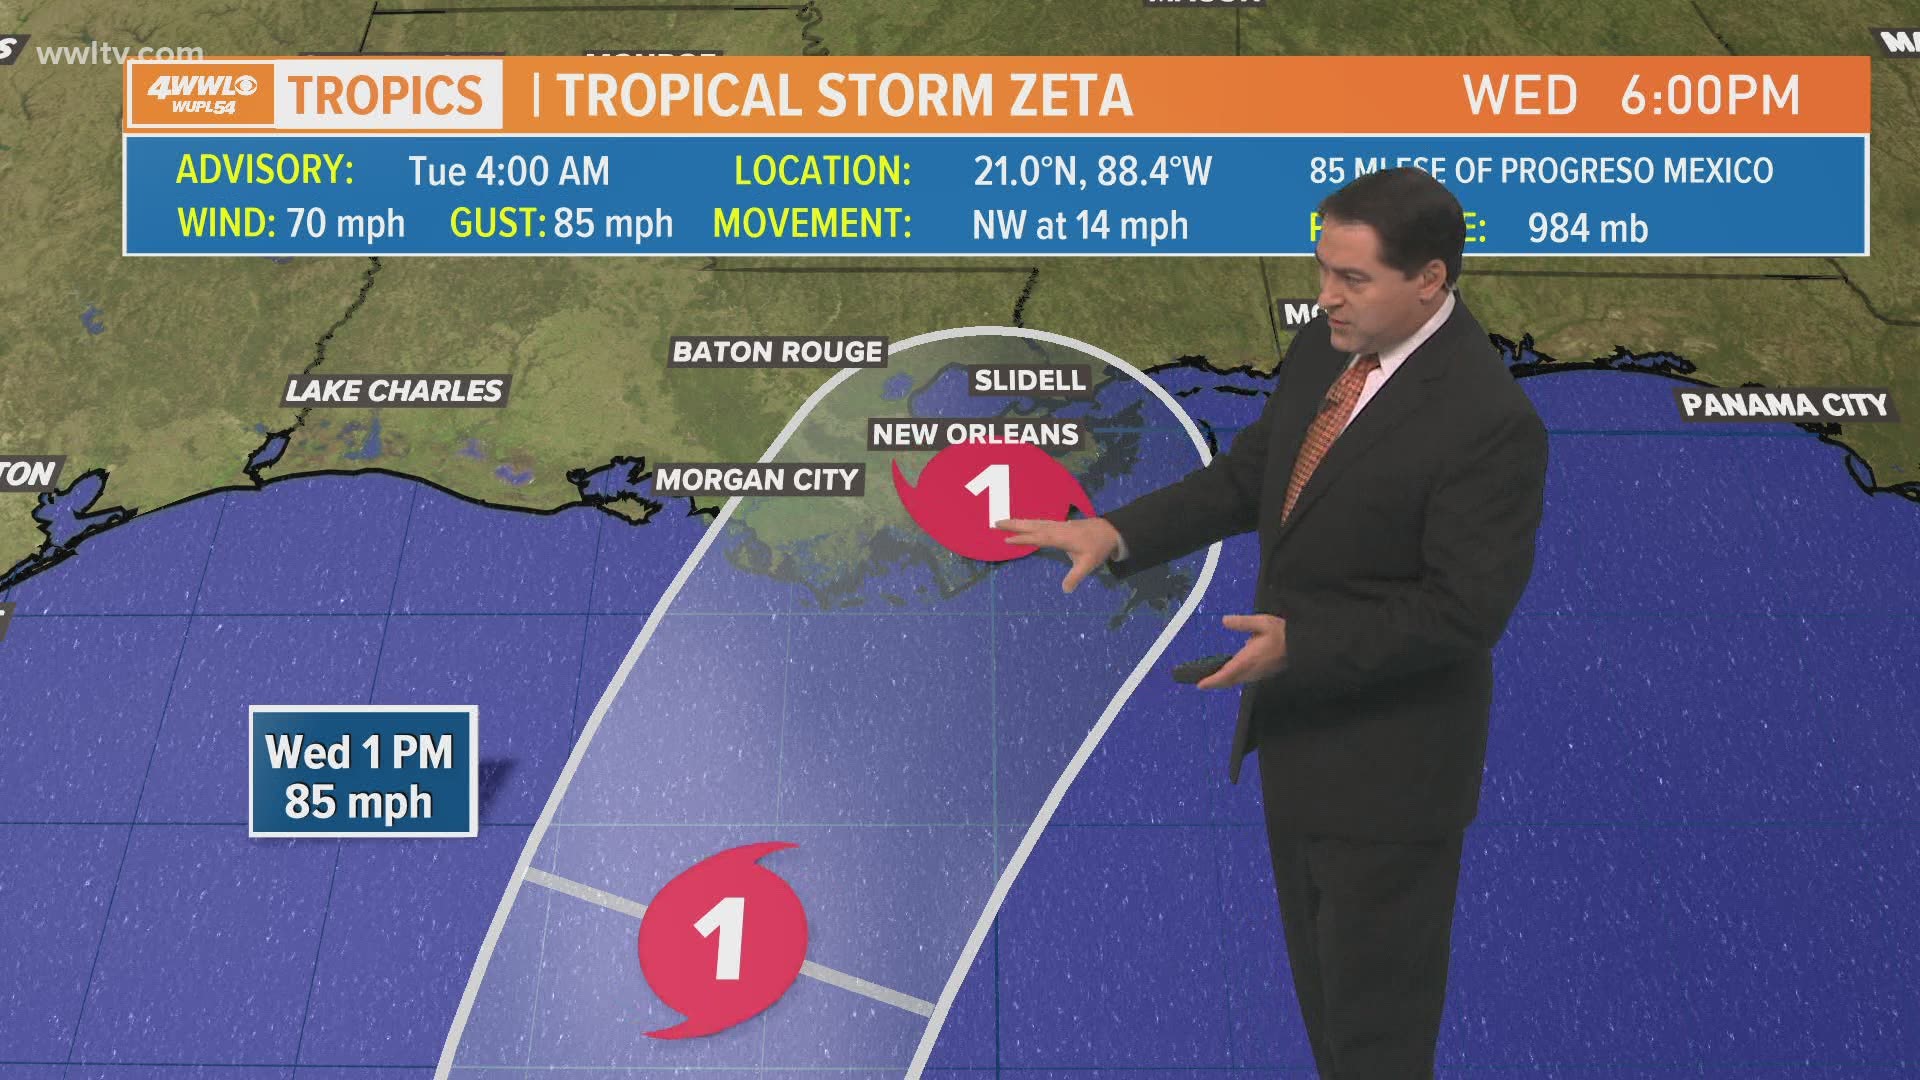 Tuesday 4 am Tropical Update: Zeta weakens to tropical storm, expected to strengthen again